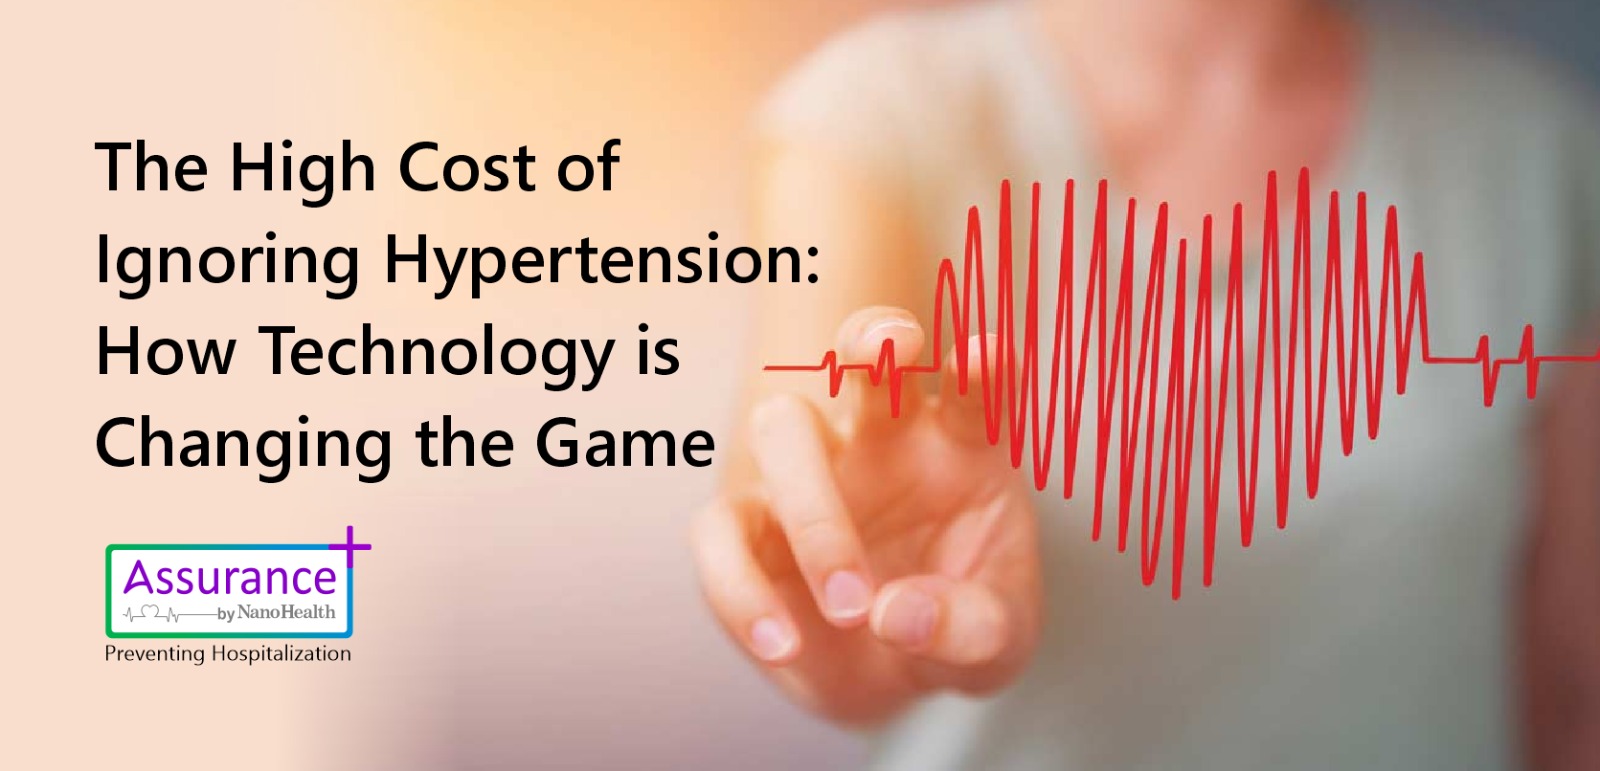 The High Cost of Ignoring Hypertension: How Technology is Changing the Game